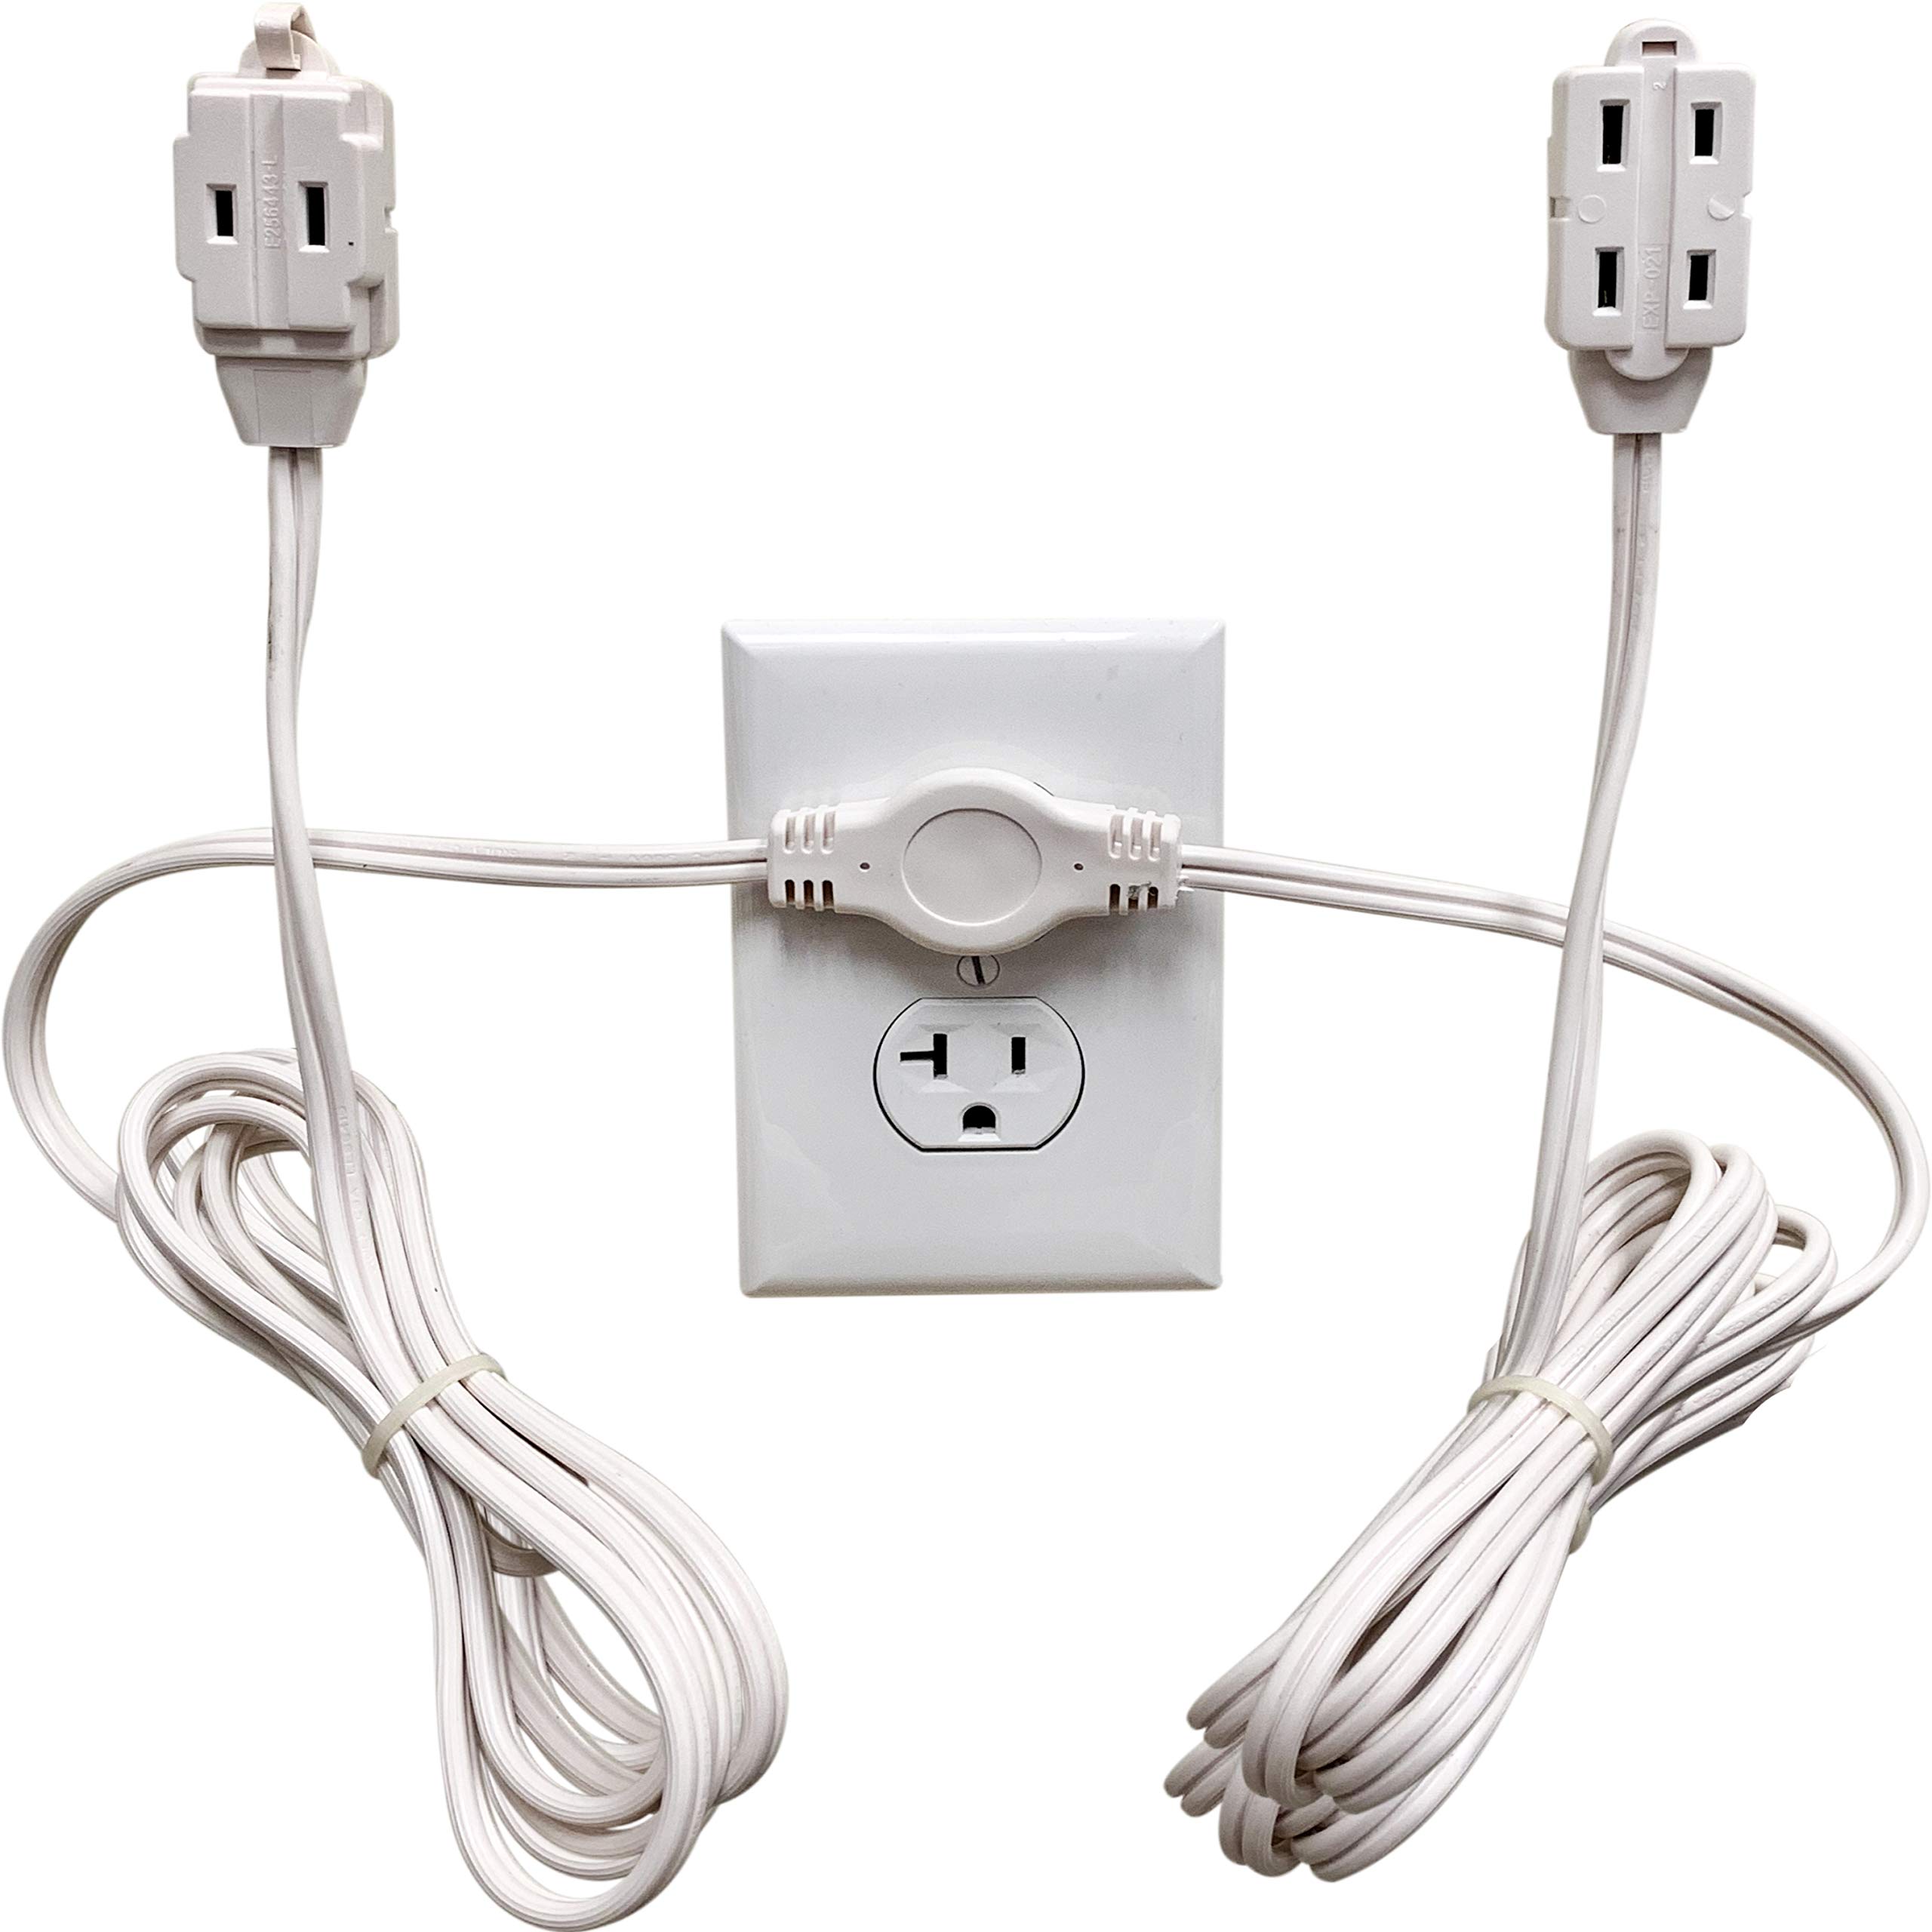 W4W Twin Extension cord Power Strip - 24 Foot cord - 12 feet on